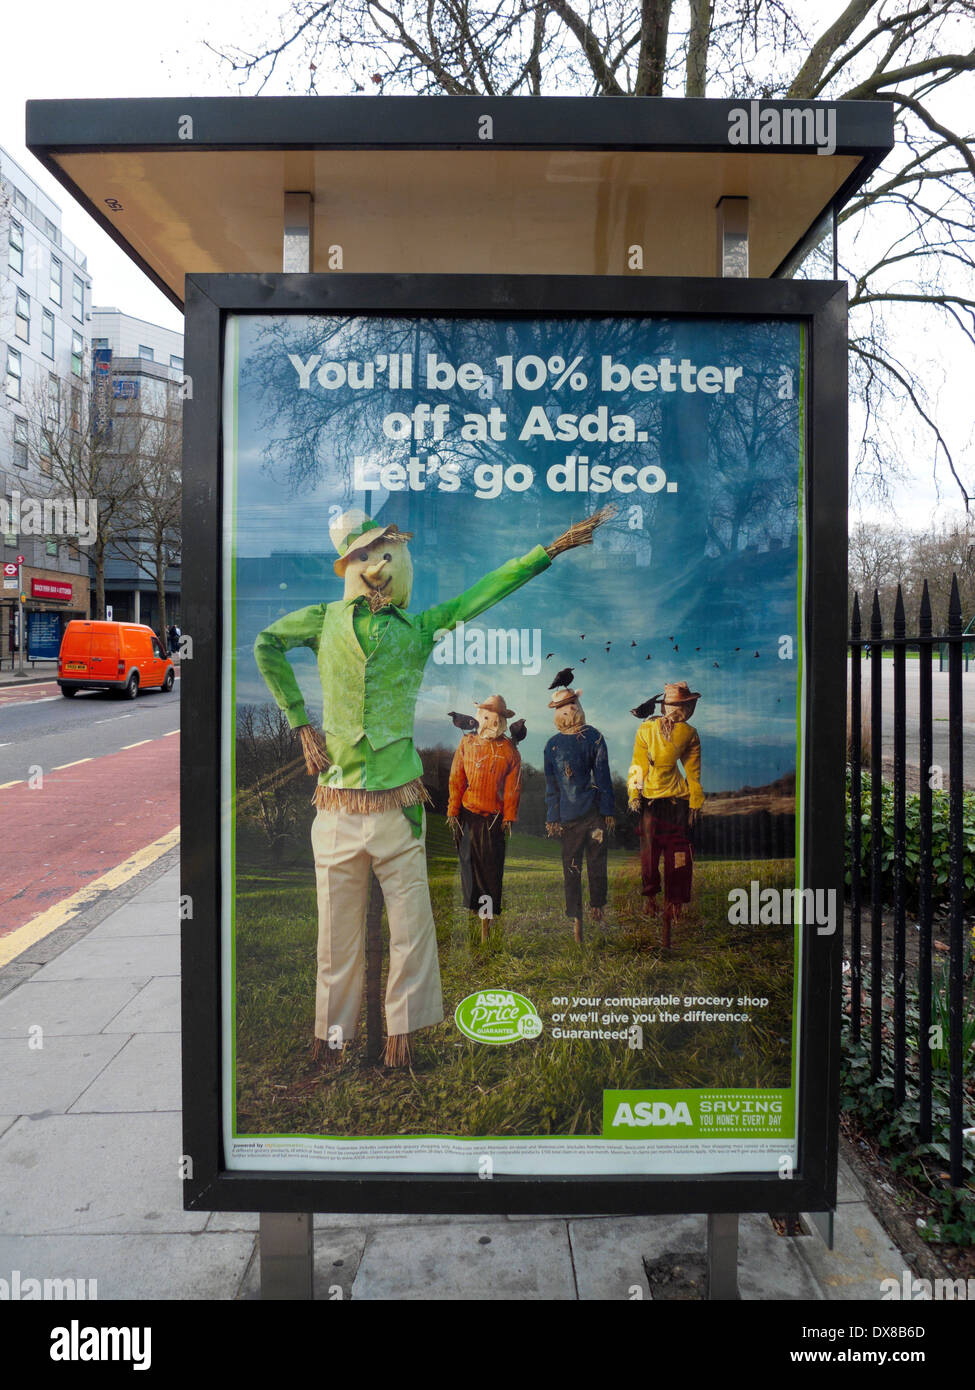 Asda poster 'You'll be 10% better off at Asda Let's go disco' advertisement on bus stop shelter in Bethnal Green London E2  England UK KATHY DEWITT Stock Photo